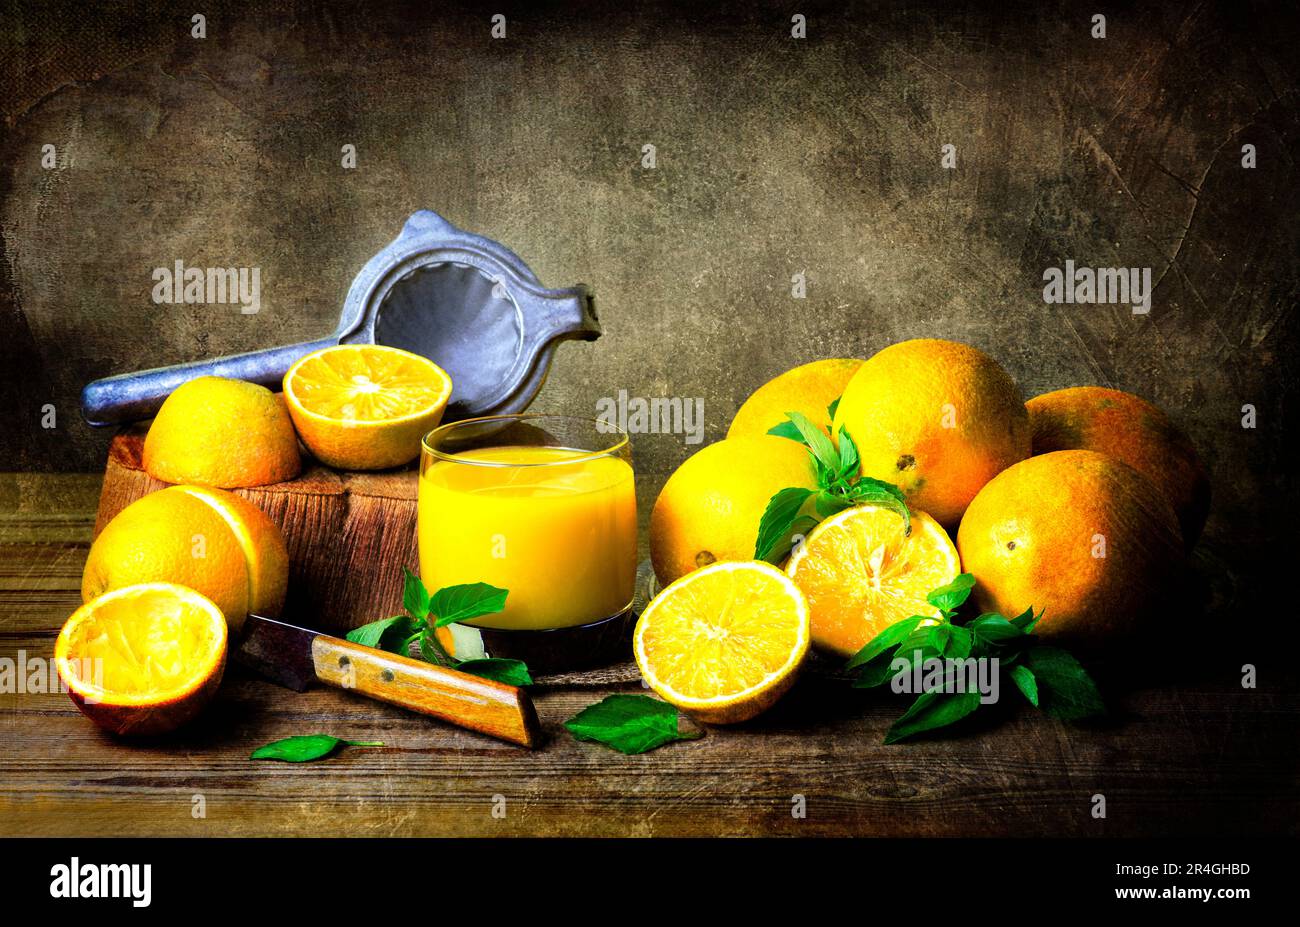 Classic Still life with delicious organic Oranges, glass of fresh orange juice placed together on rustic wooden table. Stock Photo